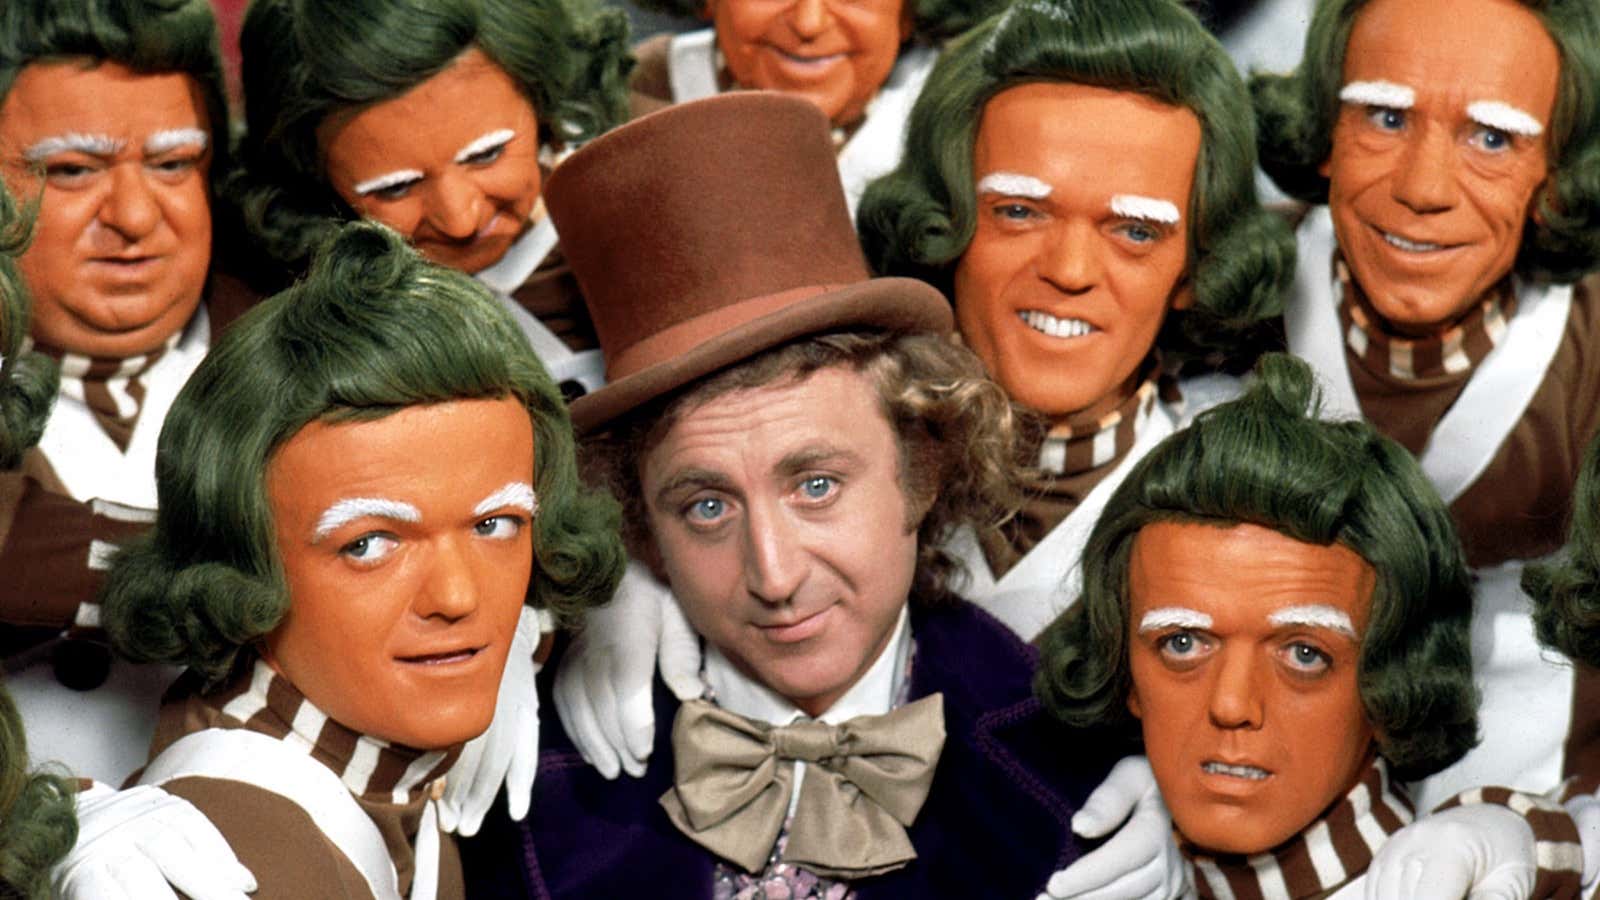 Gene Wilder plays Willy Wonka, one of Roald Dahl’s most famous characters.